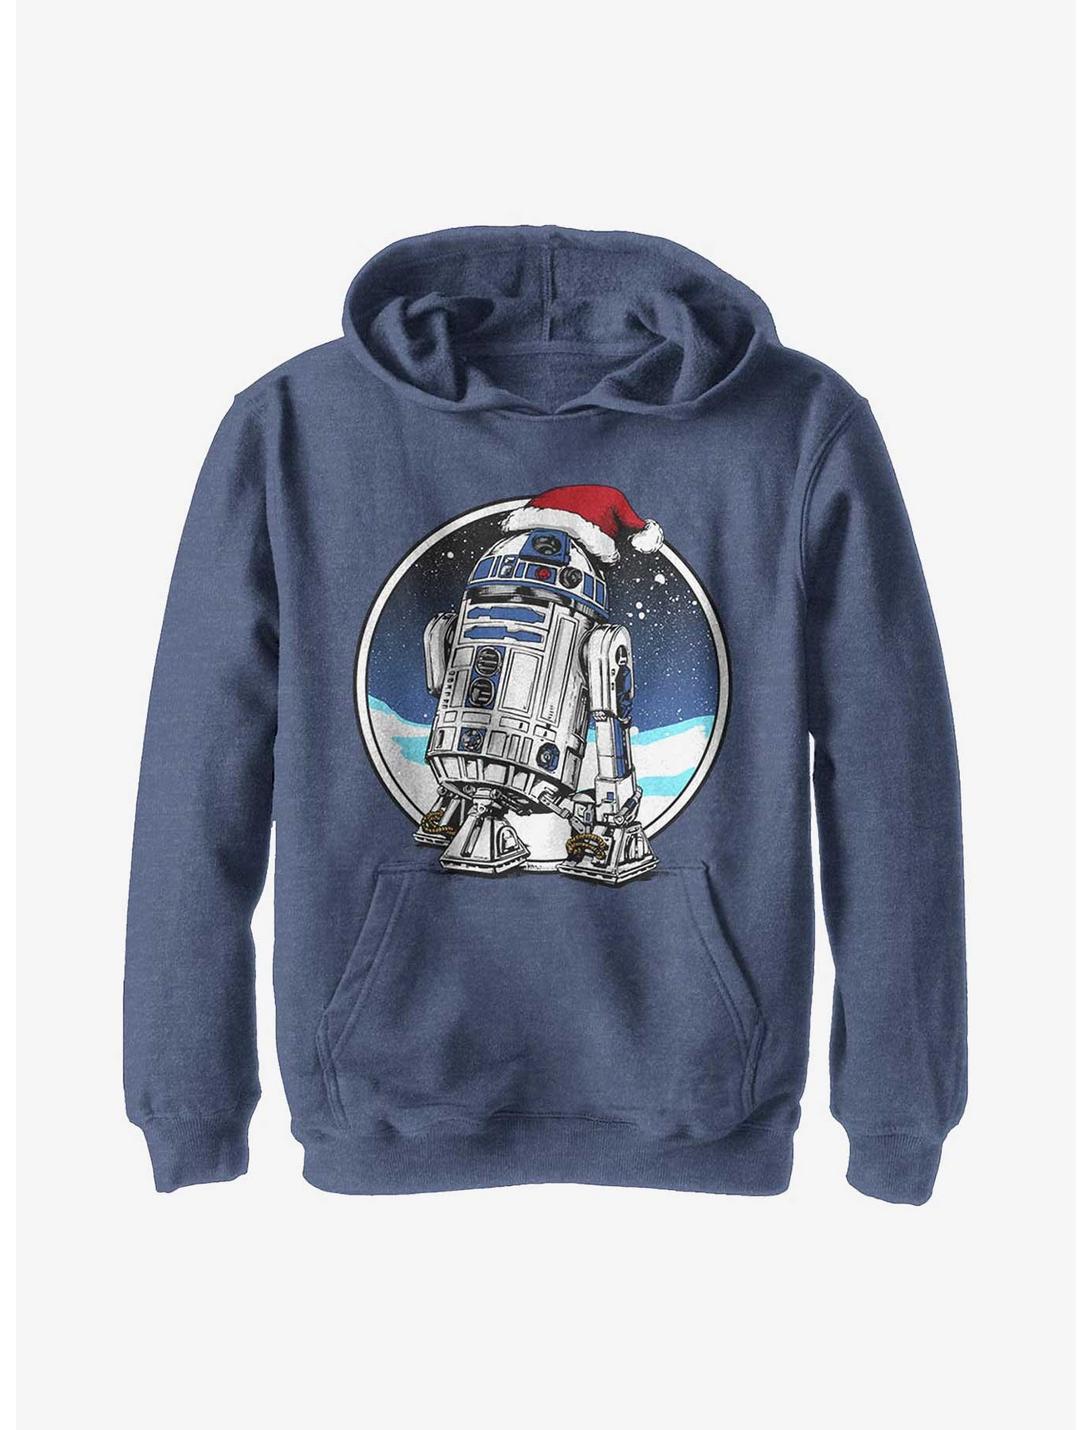 Star Wars Holiday D2 Youth Hoodie, NAVY HTR, hi-res